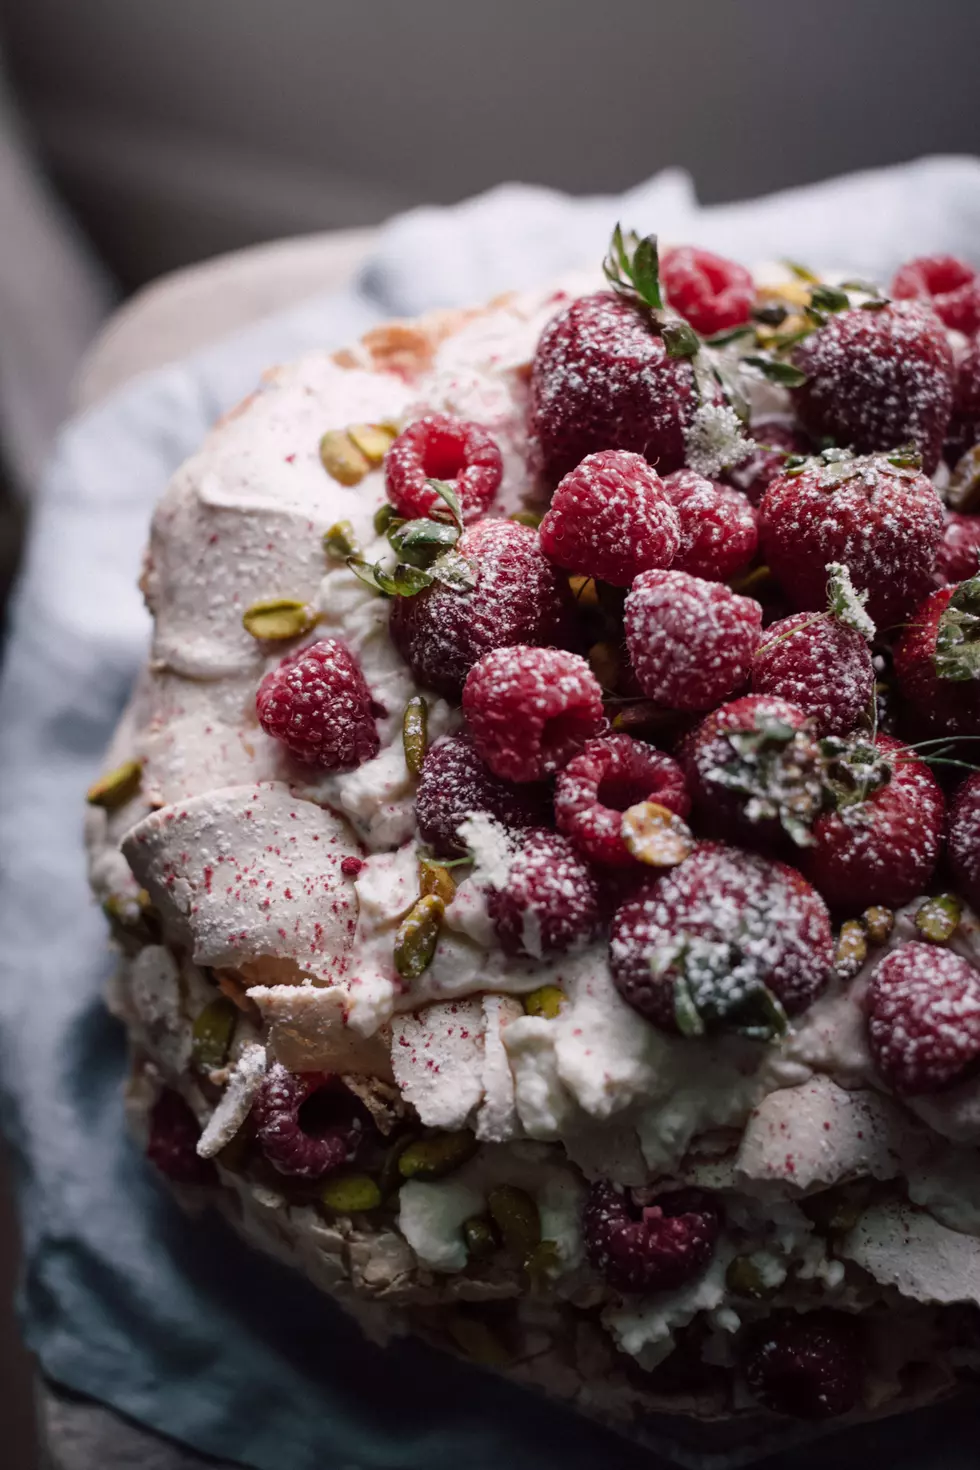 An English Eton Mess Cake is the February Dessert You Never Knew You Needed [RECIPE]